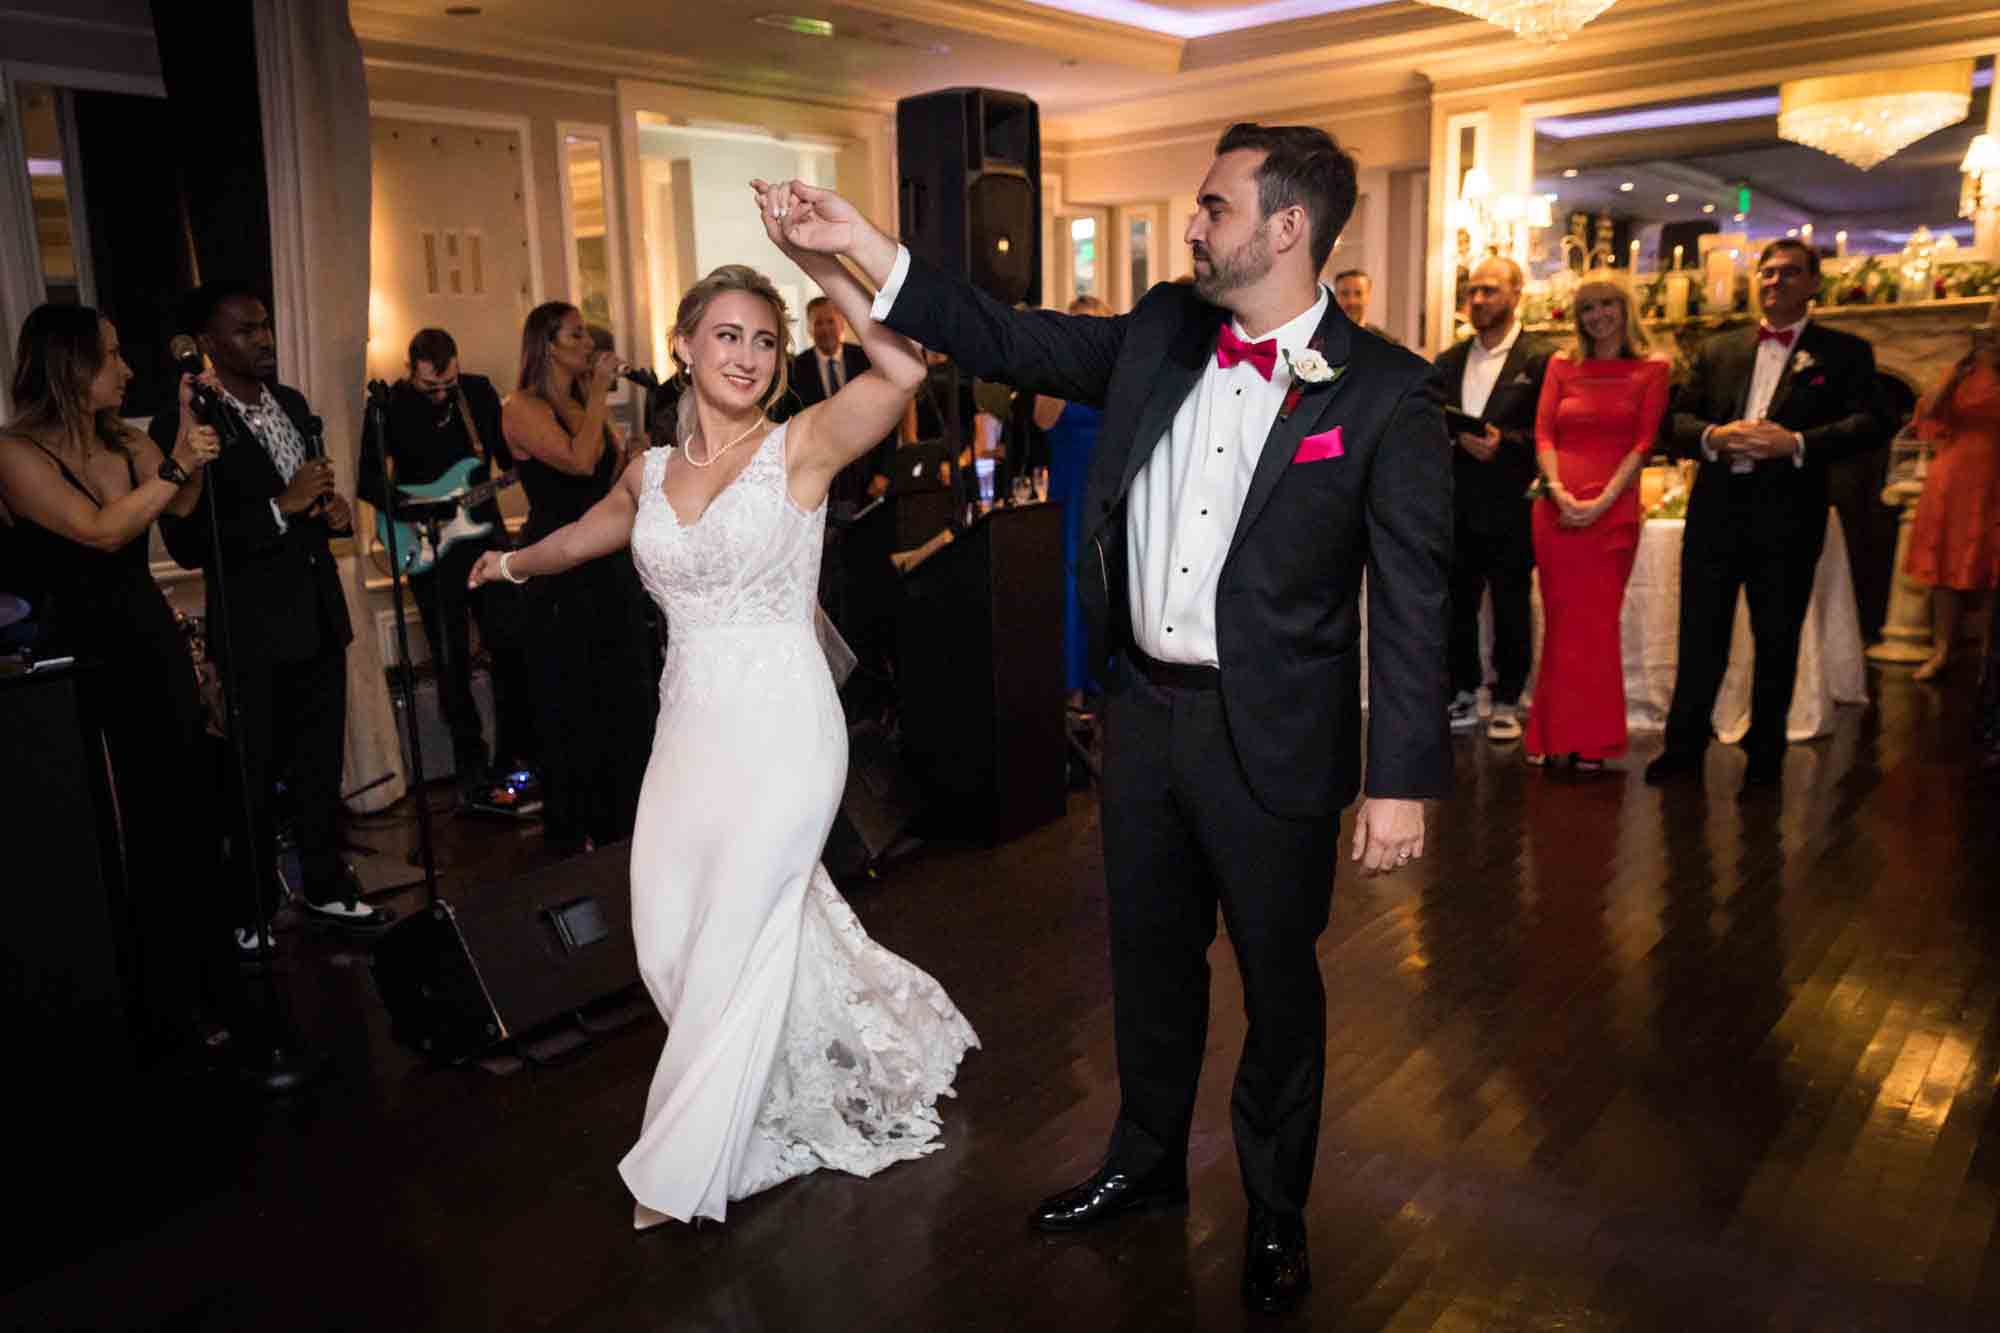 Groom leading bride on to the dance floor for first dance at a Briarcliff Manor wedding